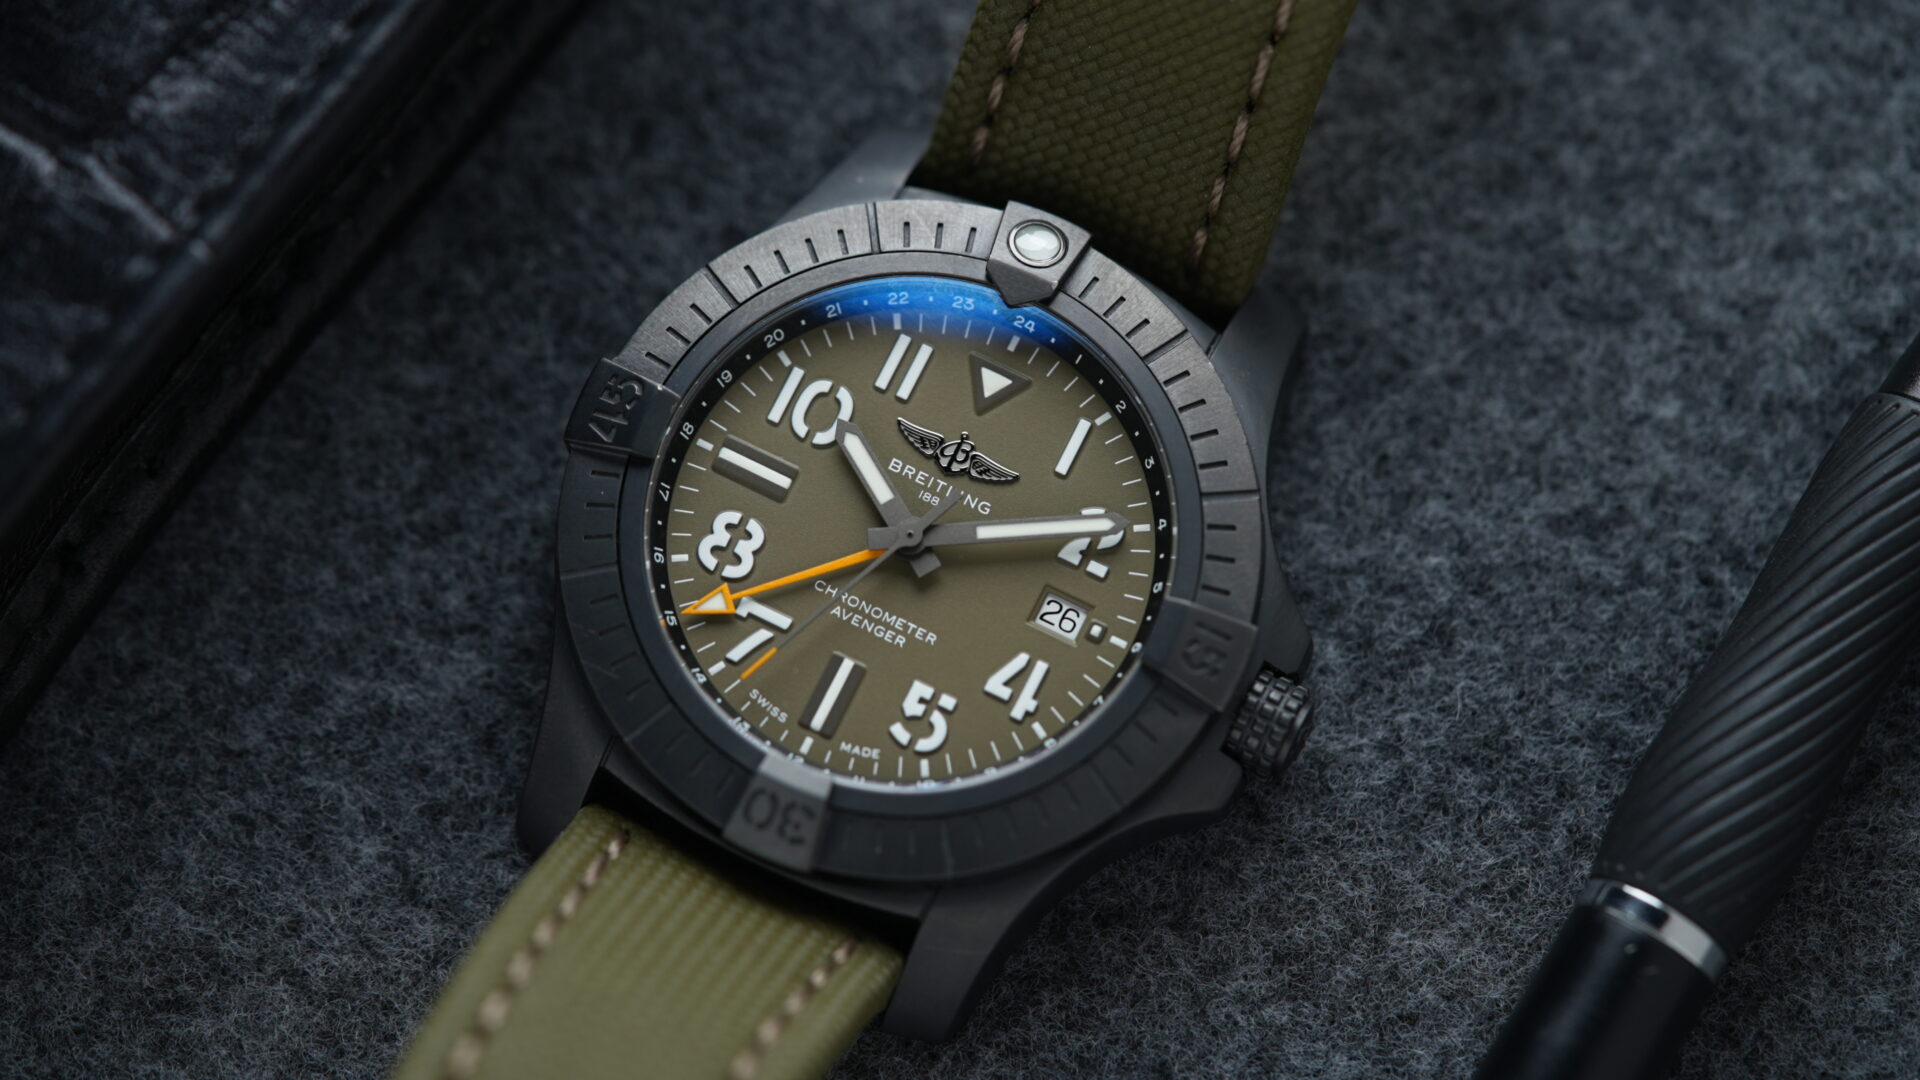 Breitling Avenger Automatic Gmt 45 Night Mission Limited V323952A1L1X1 wristwatch displayed on an angle.